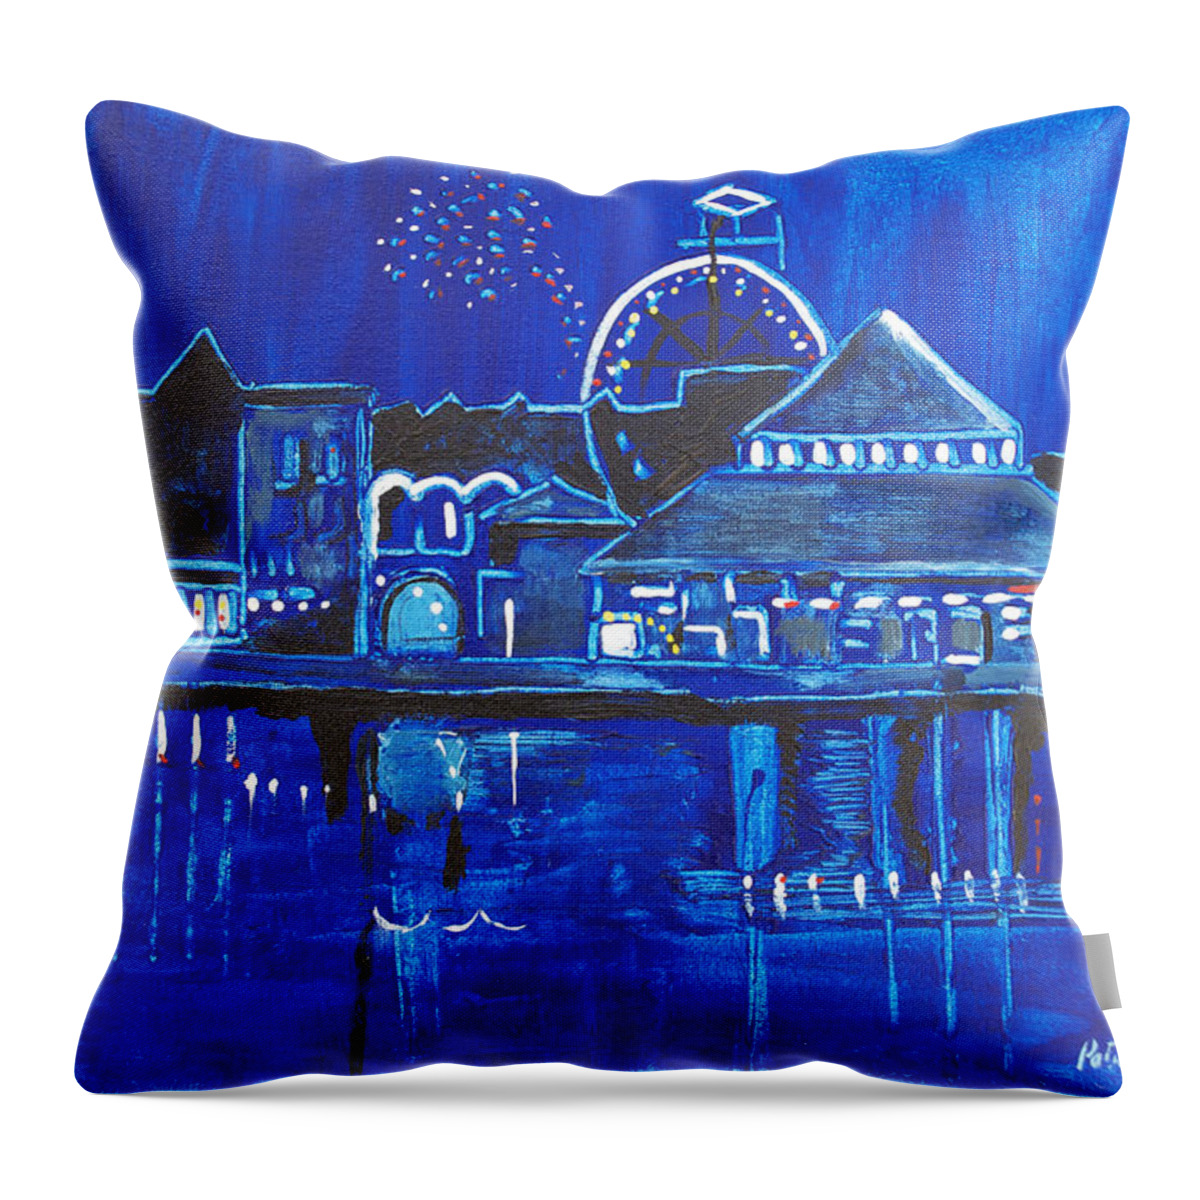 Asbury Art Throw Pillow featuring the painting Asbury Park's Night Memories by Patricia Arroyo